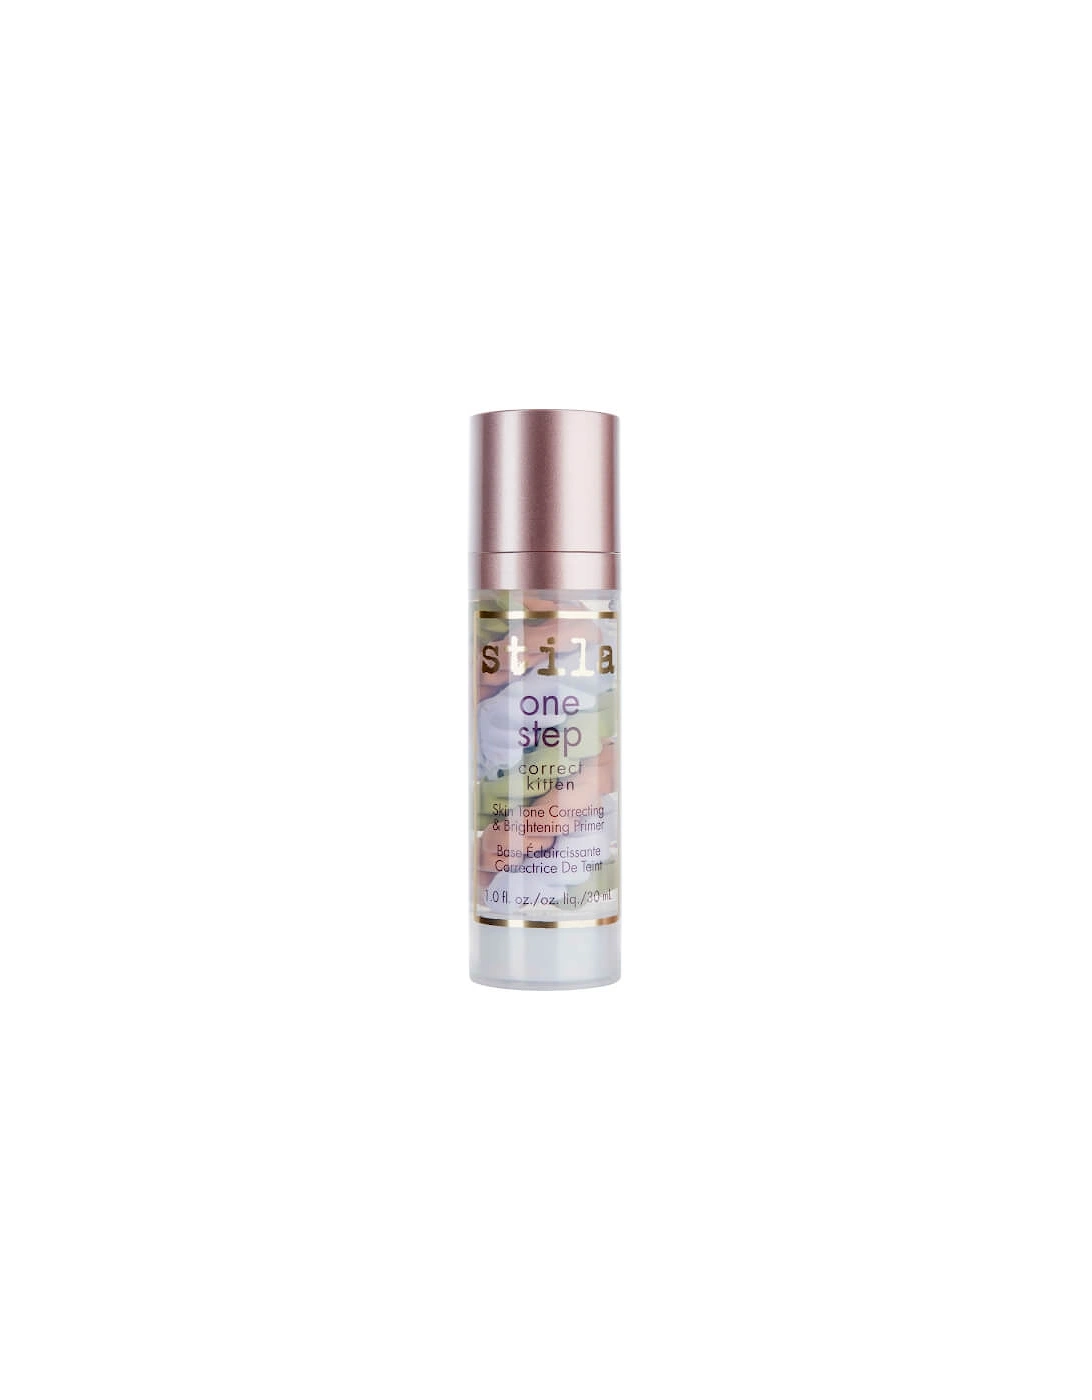 One Step Correct Kitten Skin Tone Correcting and Brightening Primer 30ml, 2 of 1